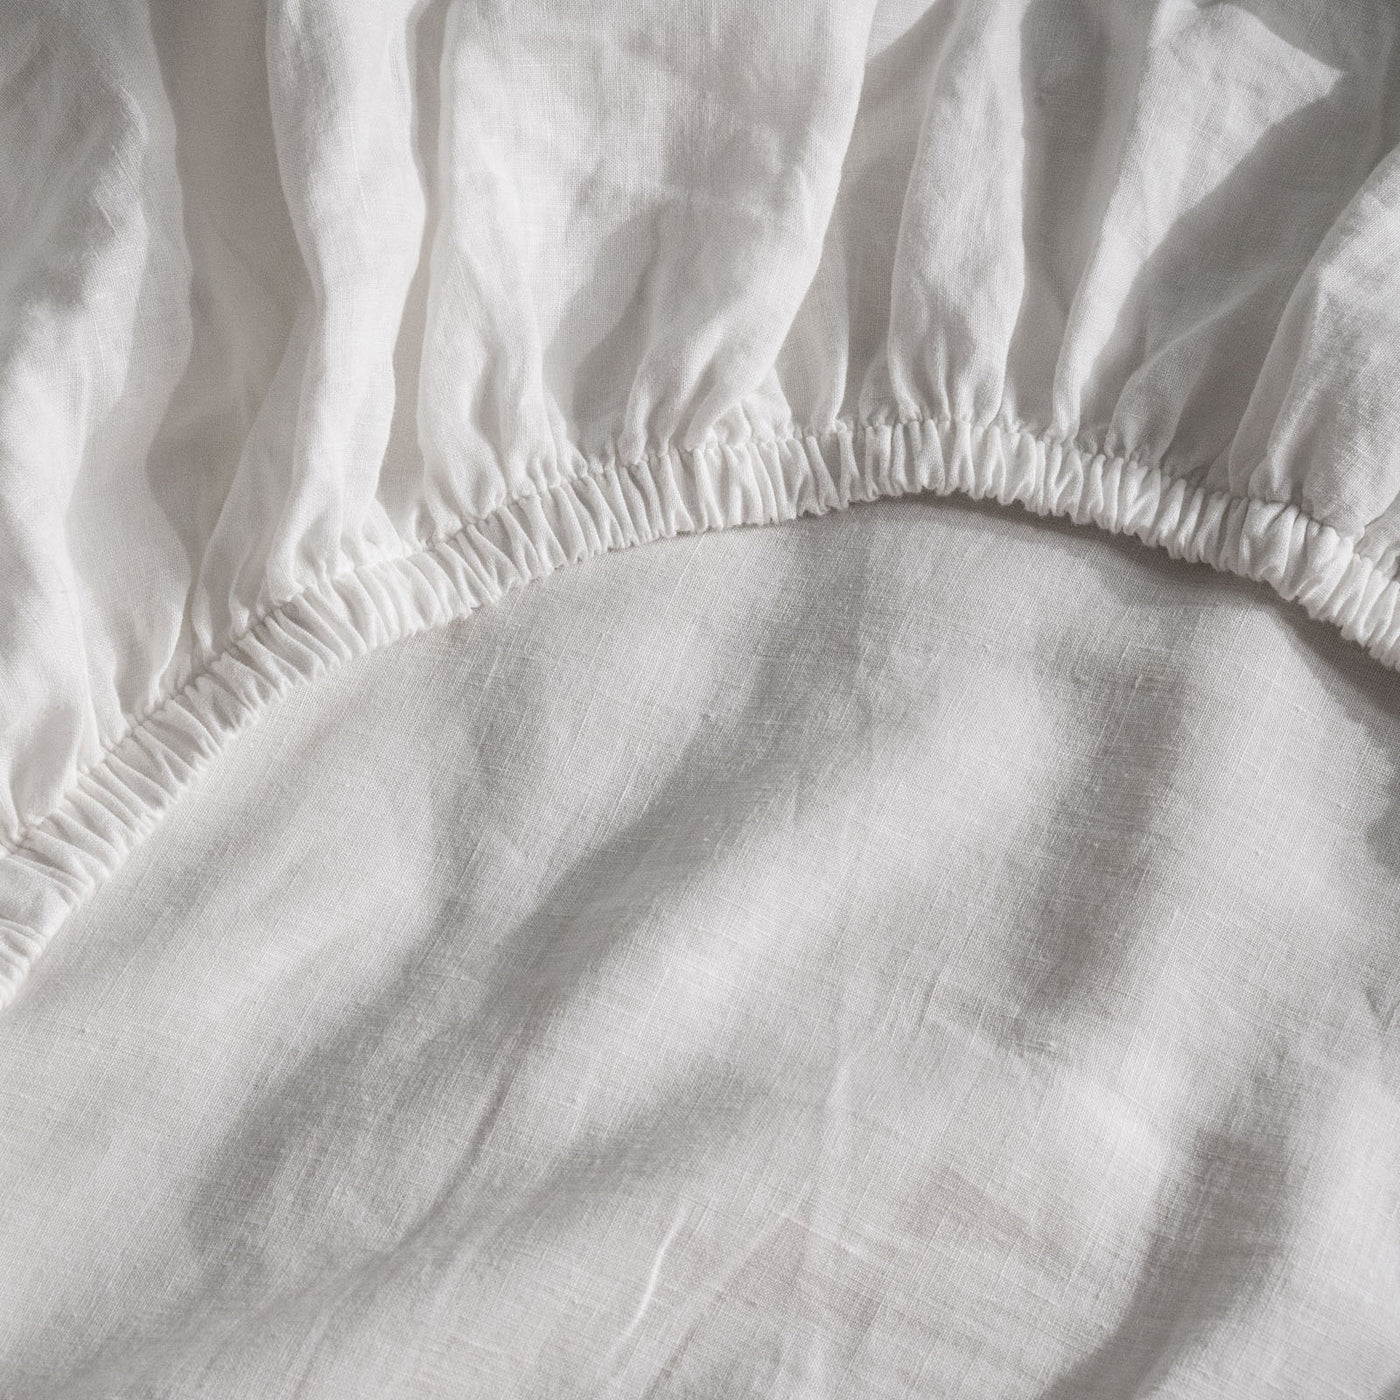 French Flax Linen Fitted Sheet in White